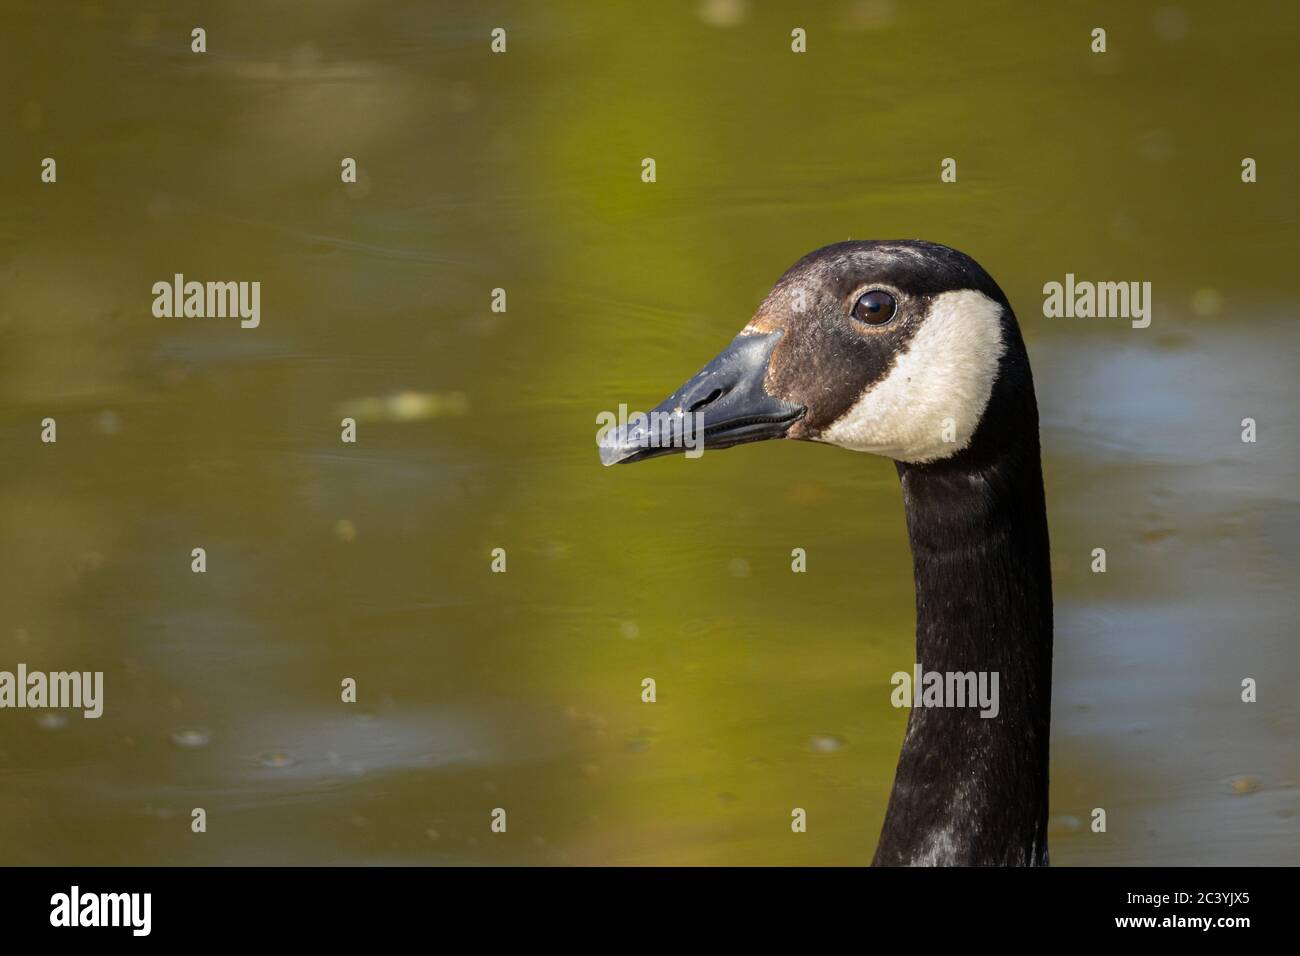 Close up portrait of a Canadian goose. Stock Photo